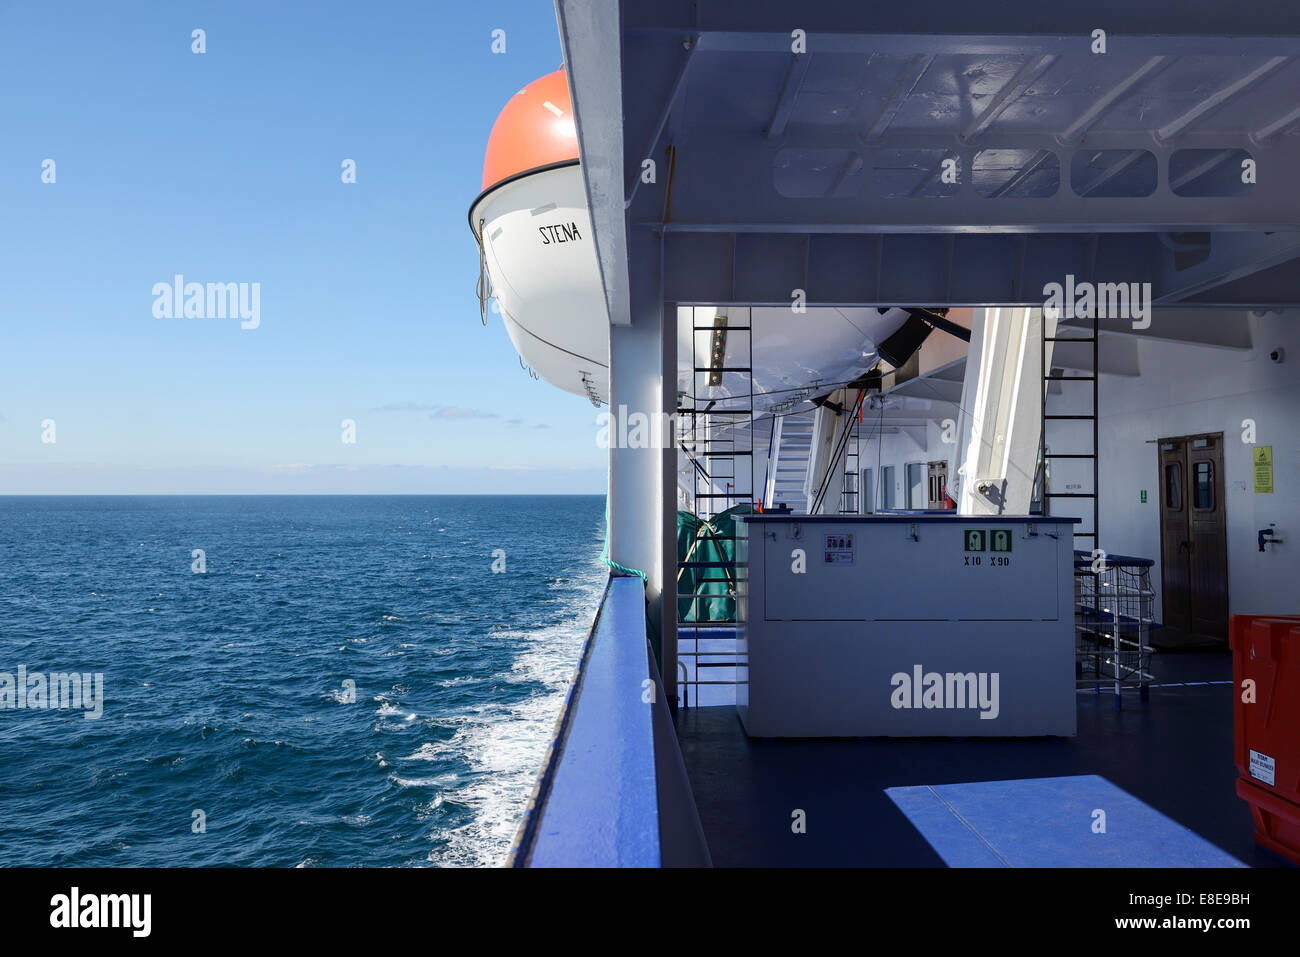 The view from the deck of the Stena Lagan Irish Sea ferry Stock Photo